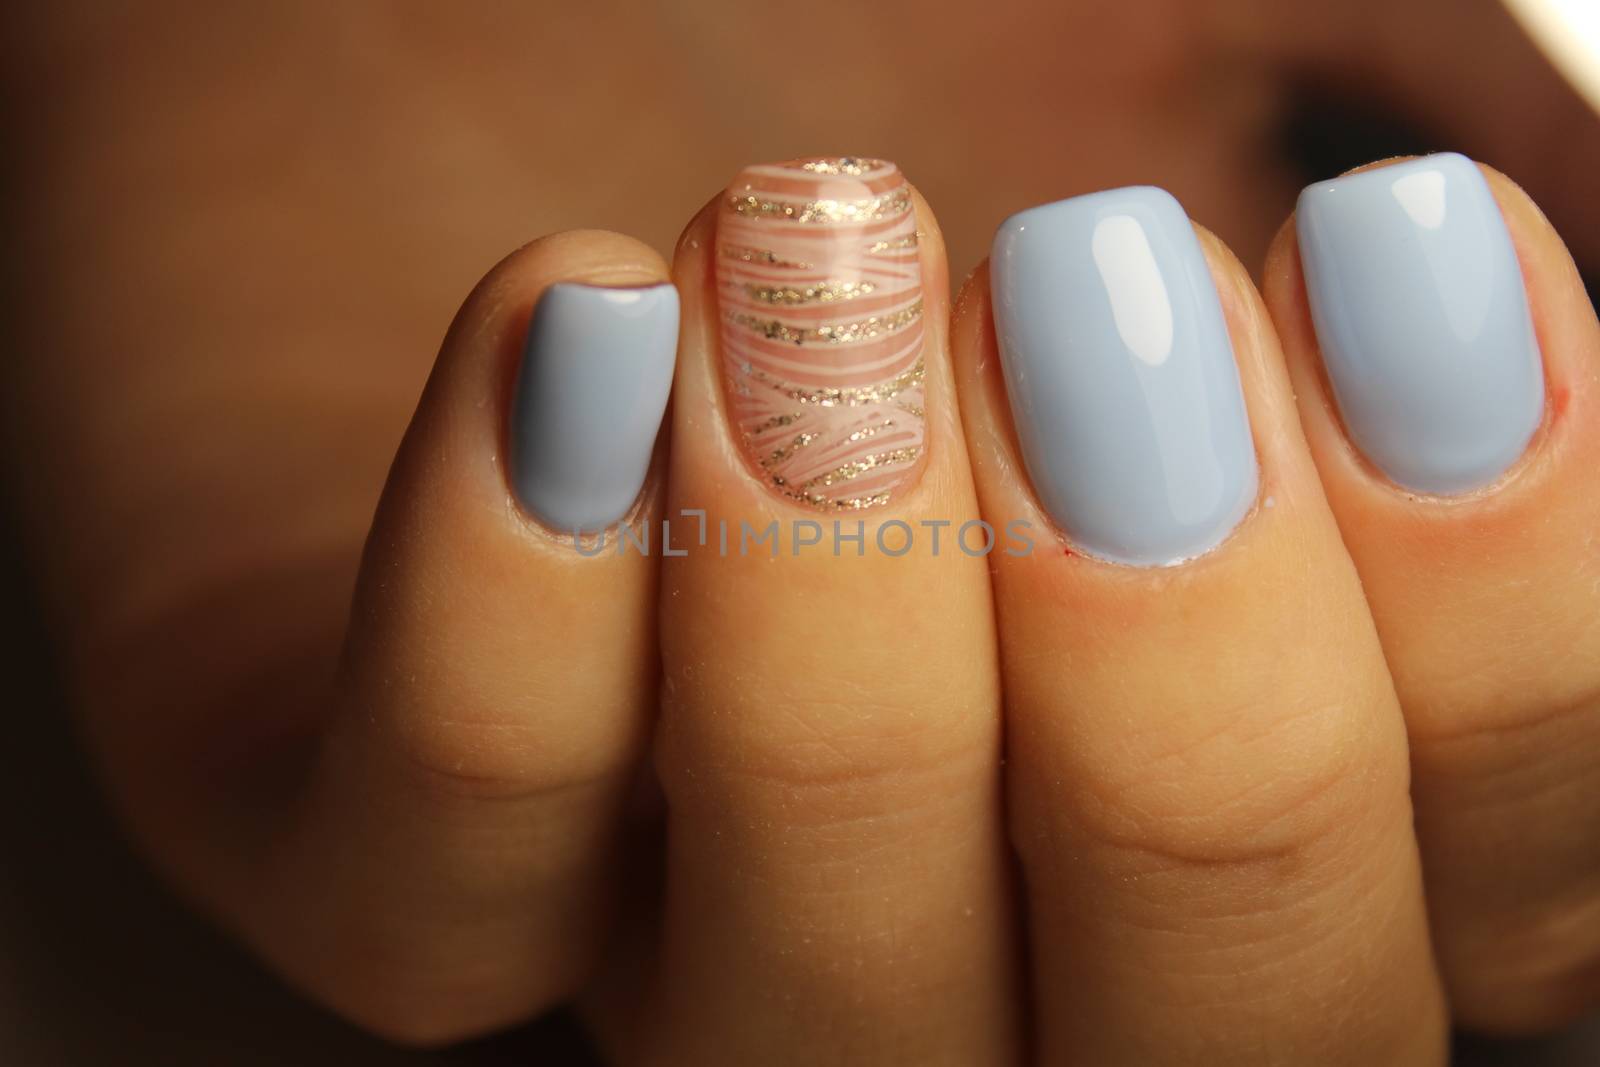 Design of manicure thin lines, blue and silver nails